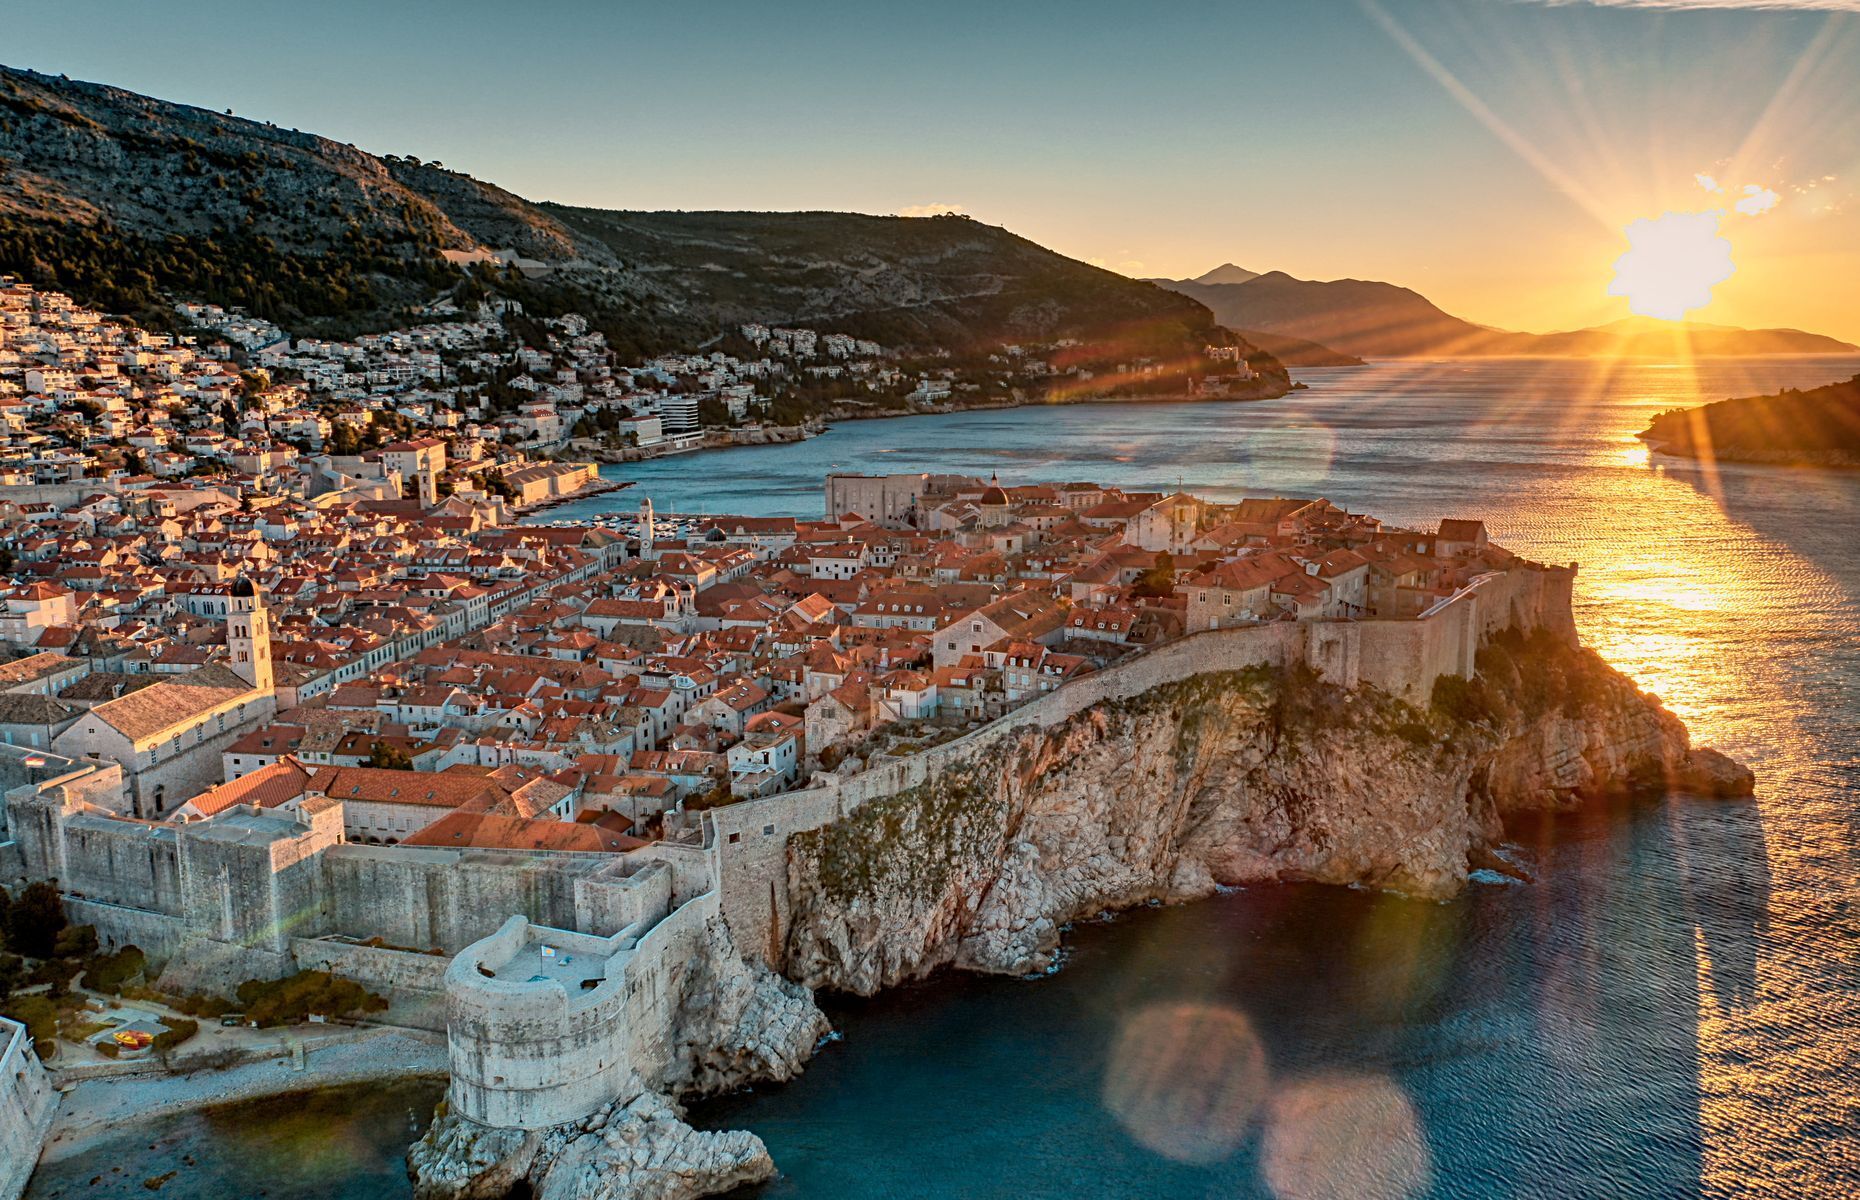 Well-known to fans of <em>Game of Thrones</em>, <a href="https://tzdubrovnik.hr/lang/en/news/gradski_vodic/index.html" rel="noreferrer noopener">Dubrovnik</a> is a cultural city with a lot to offer history buffs. In addition to strolling along mythical city walls and enjoying a view of Dubrovnik from above, visit the Rector’s Palace to see art from multiple eras alongside artifacts from Croatia’s war for independence. Those who prefer sunbathing or dipping their toes in the sea should stop off at the sublime Banje Beach.